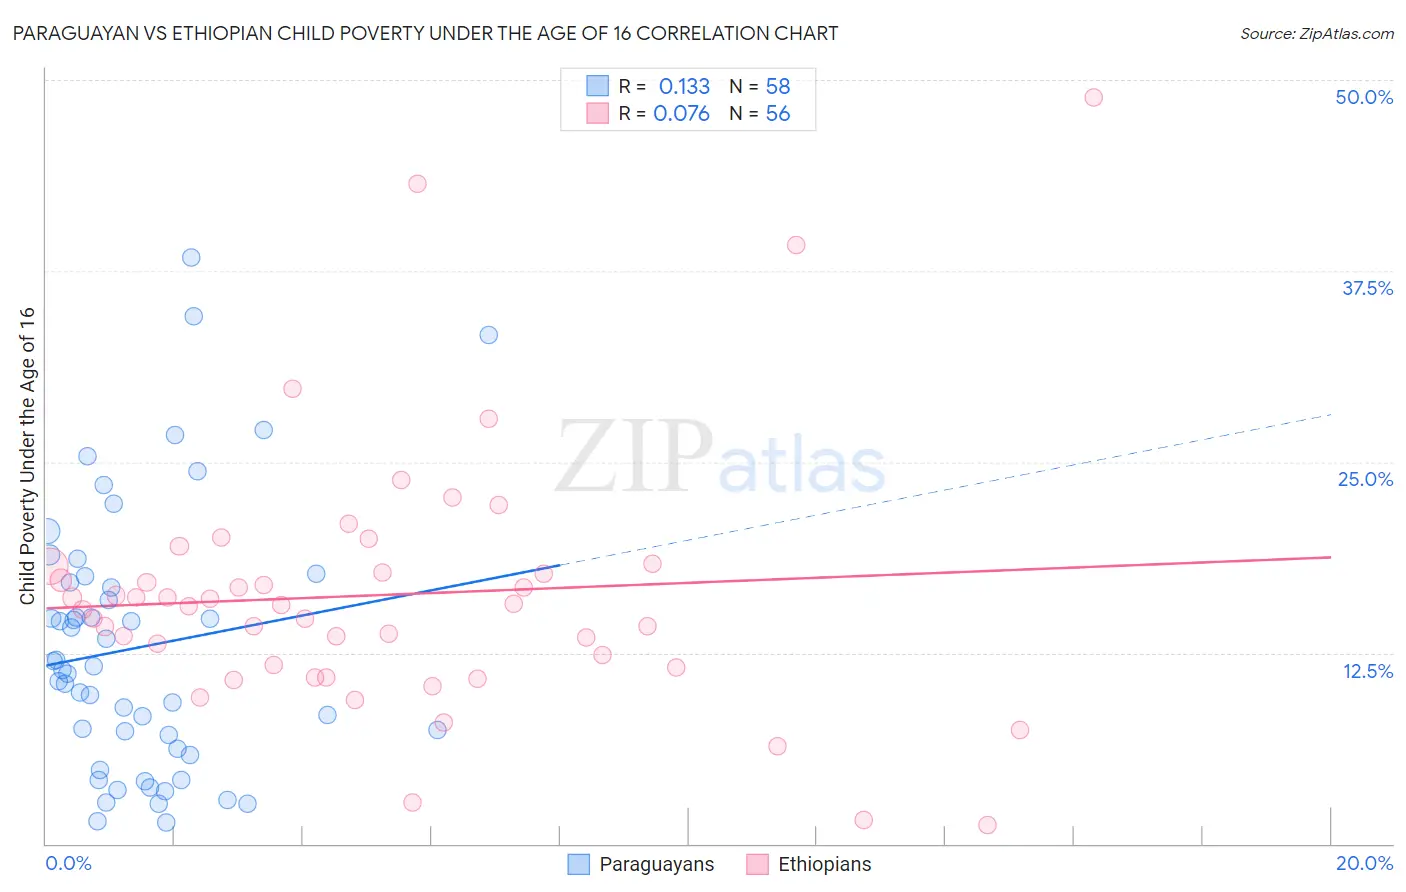 Paraguayan vs Ethiopian Child Poverty Under the Age of 16